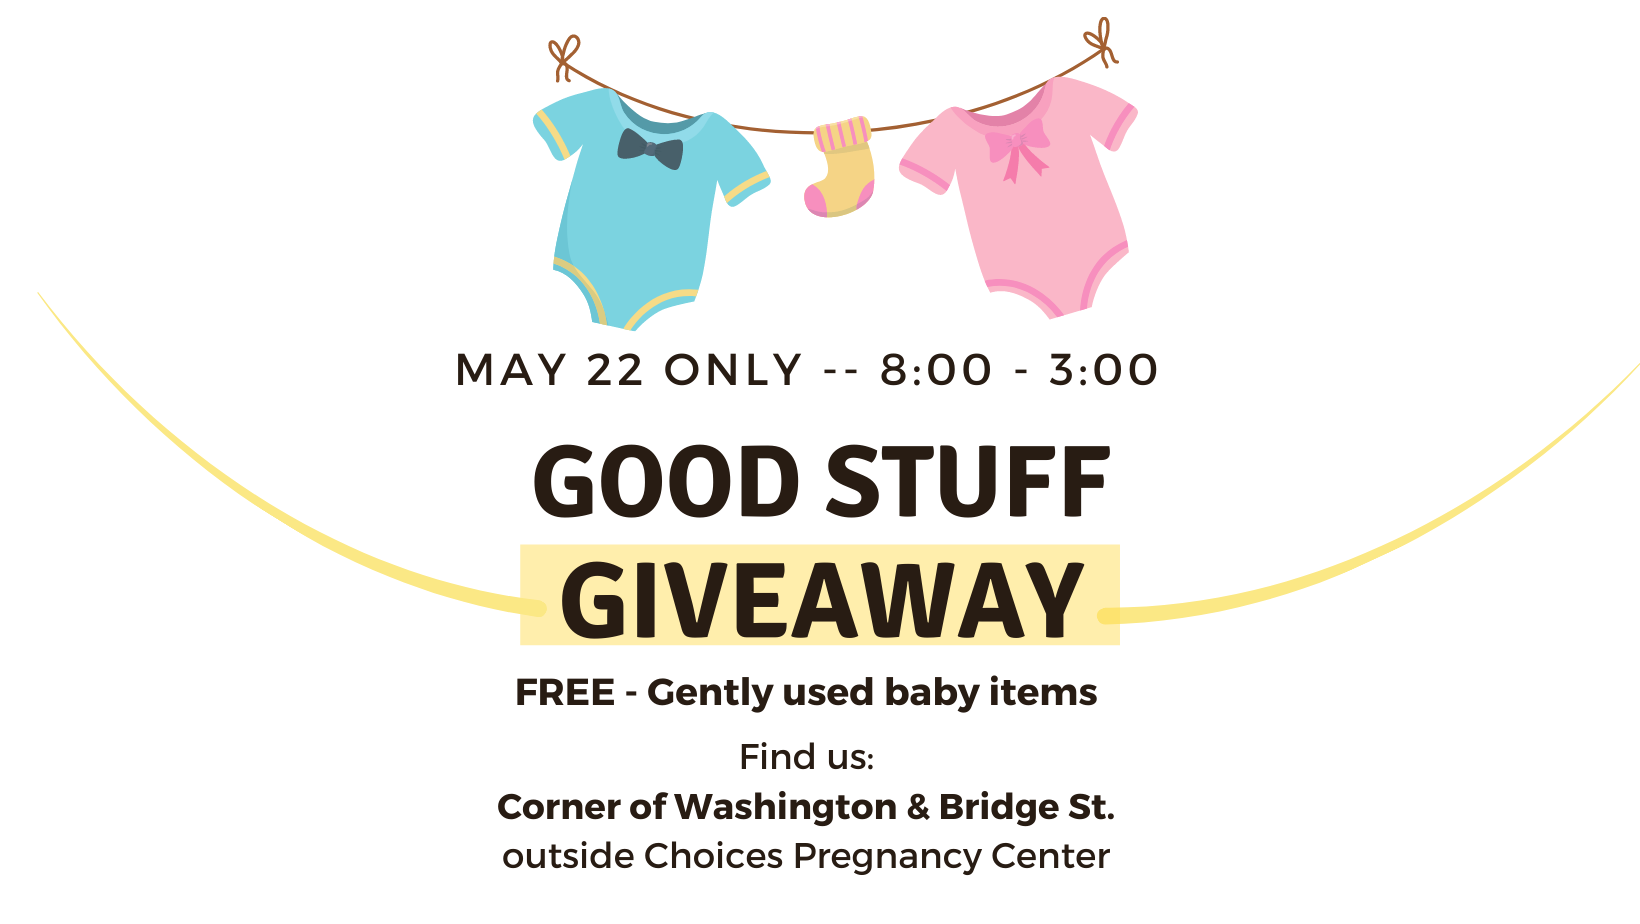 Gently used baby items will be available free to our neighbors.